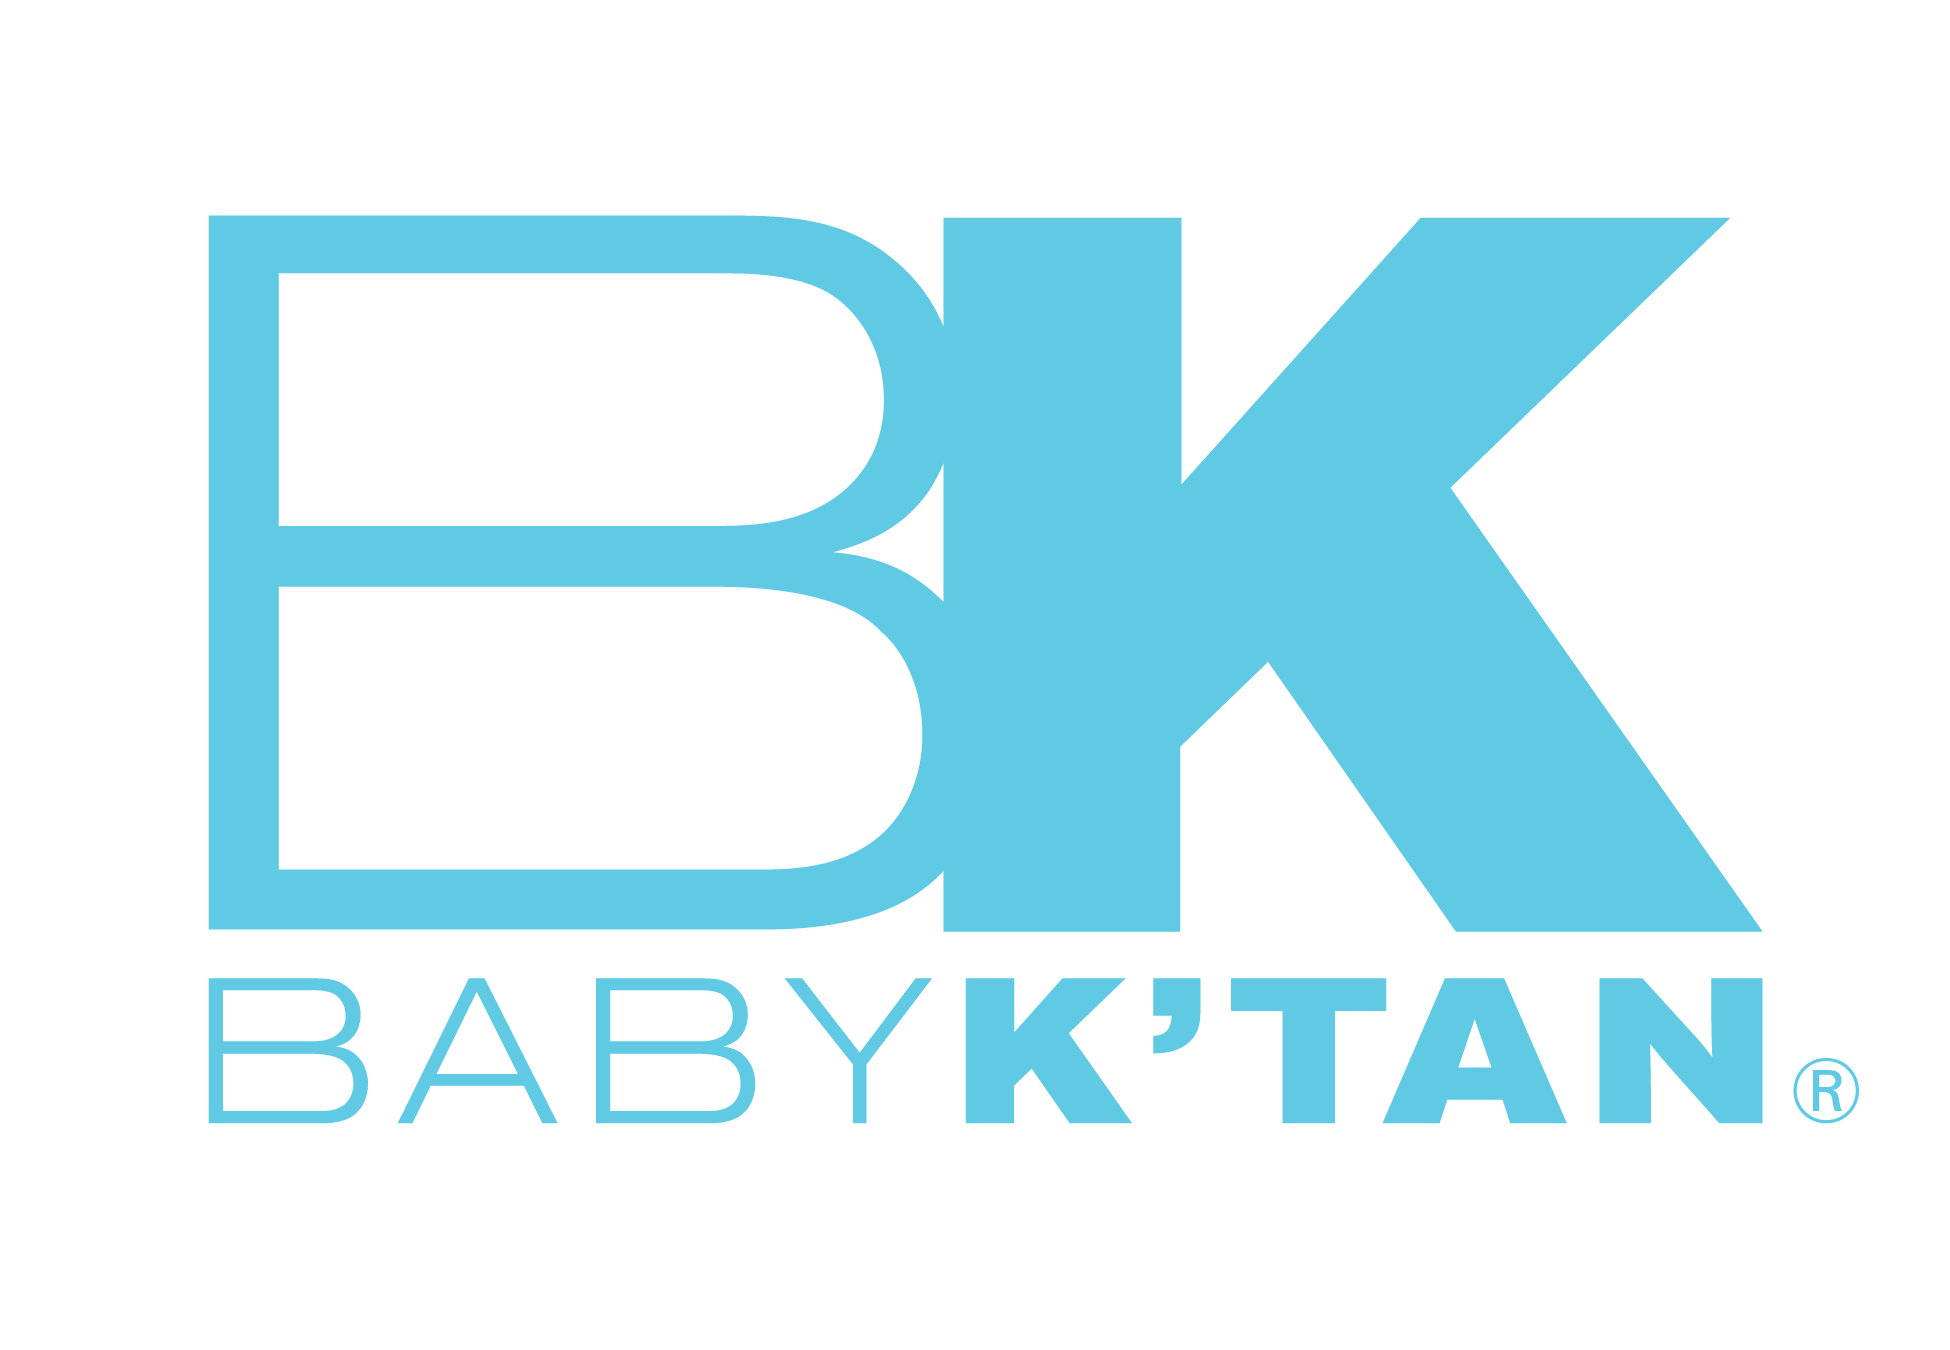 Tan Company Logo - Baby K'tan Redesigns Logo - Baby K'tan Baby Carriers and Wraps